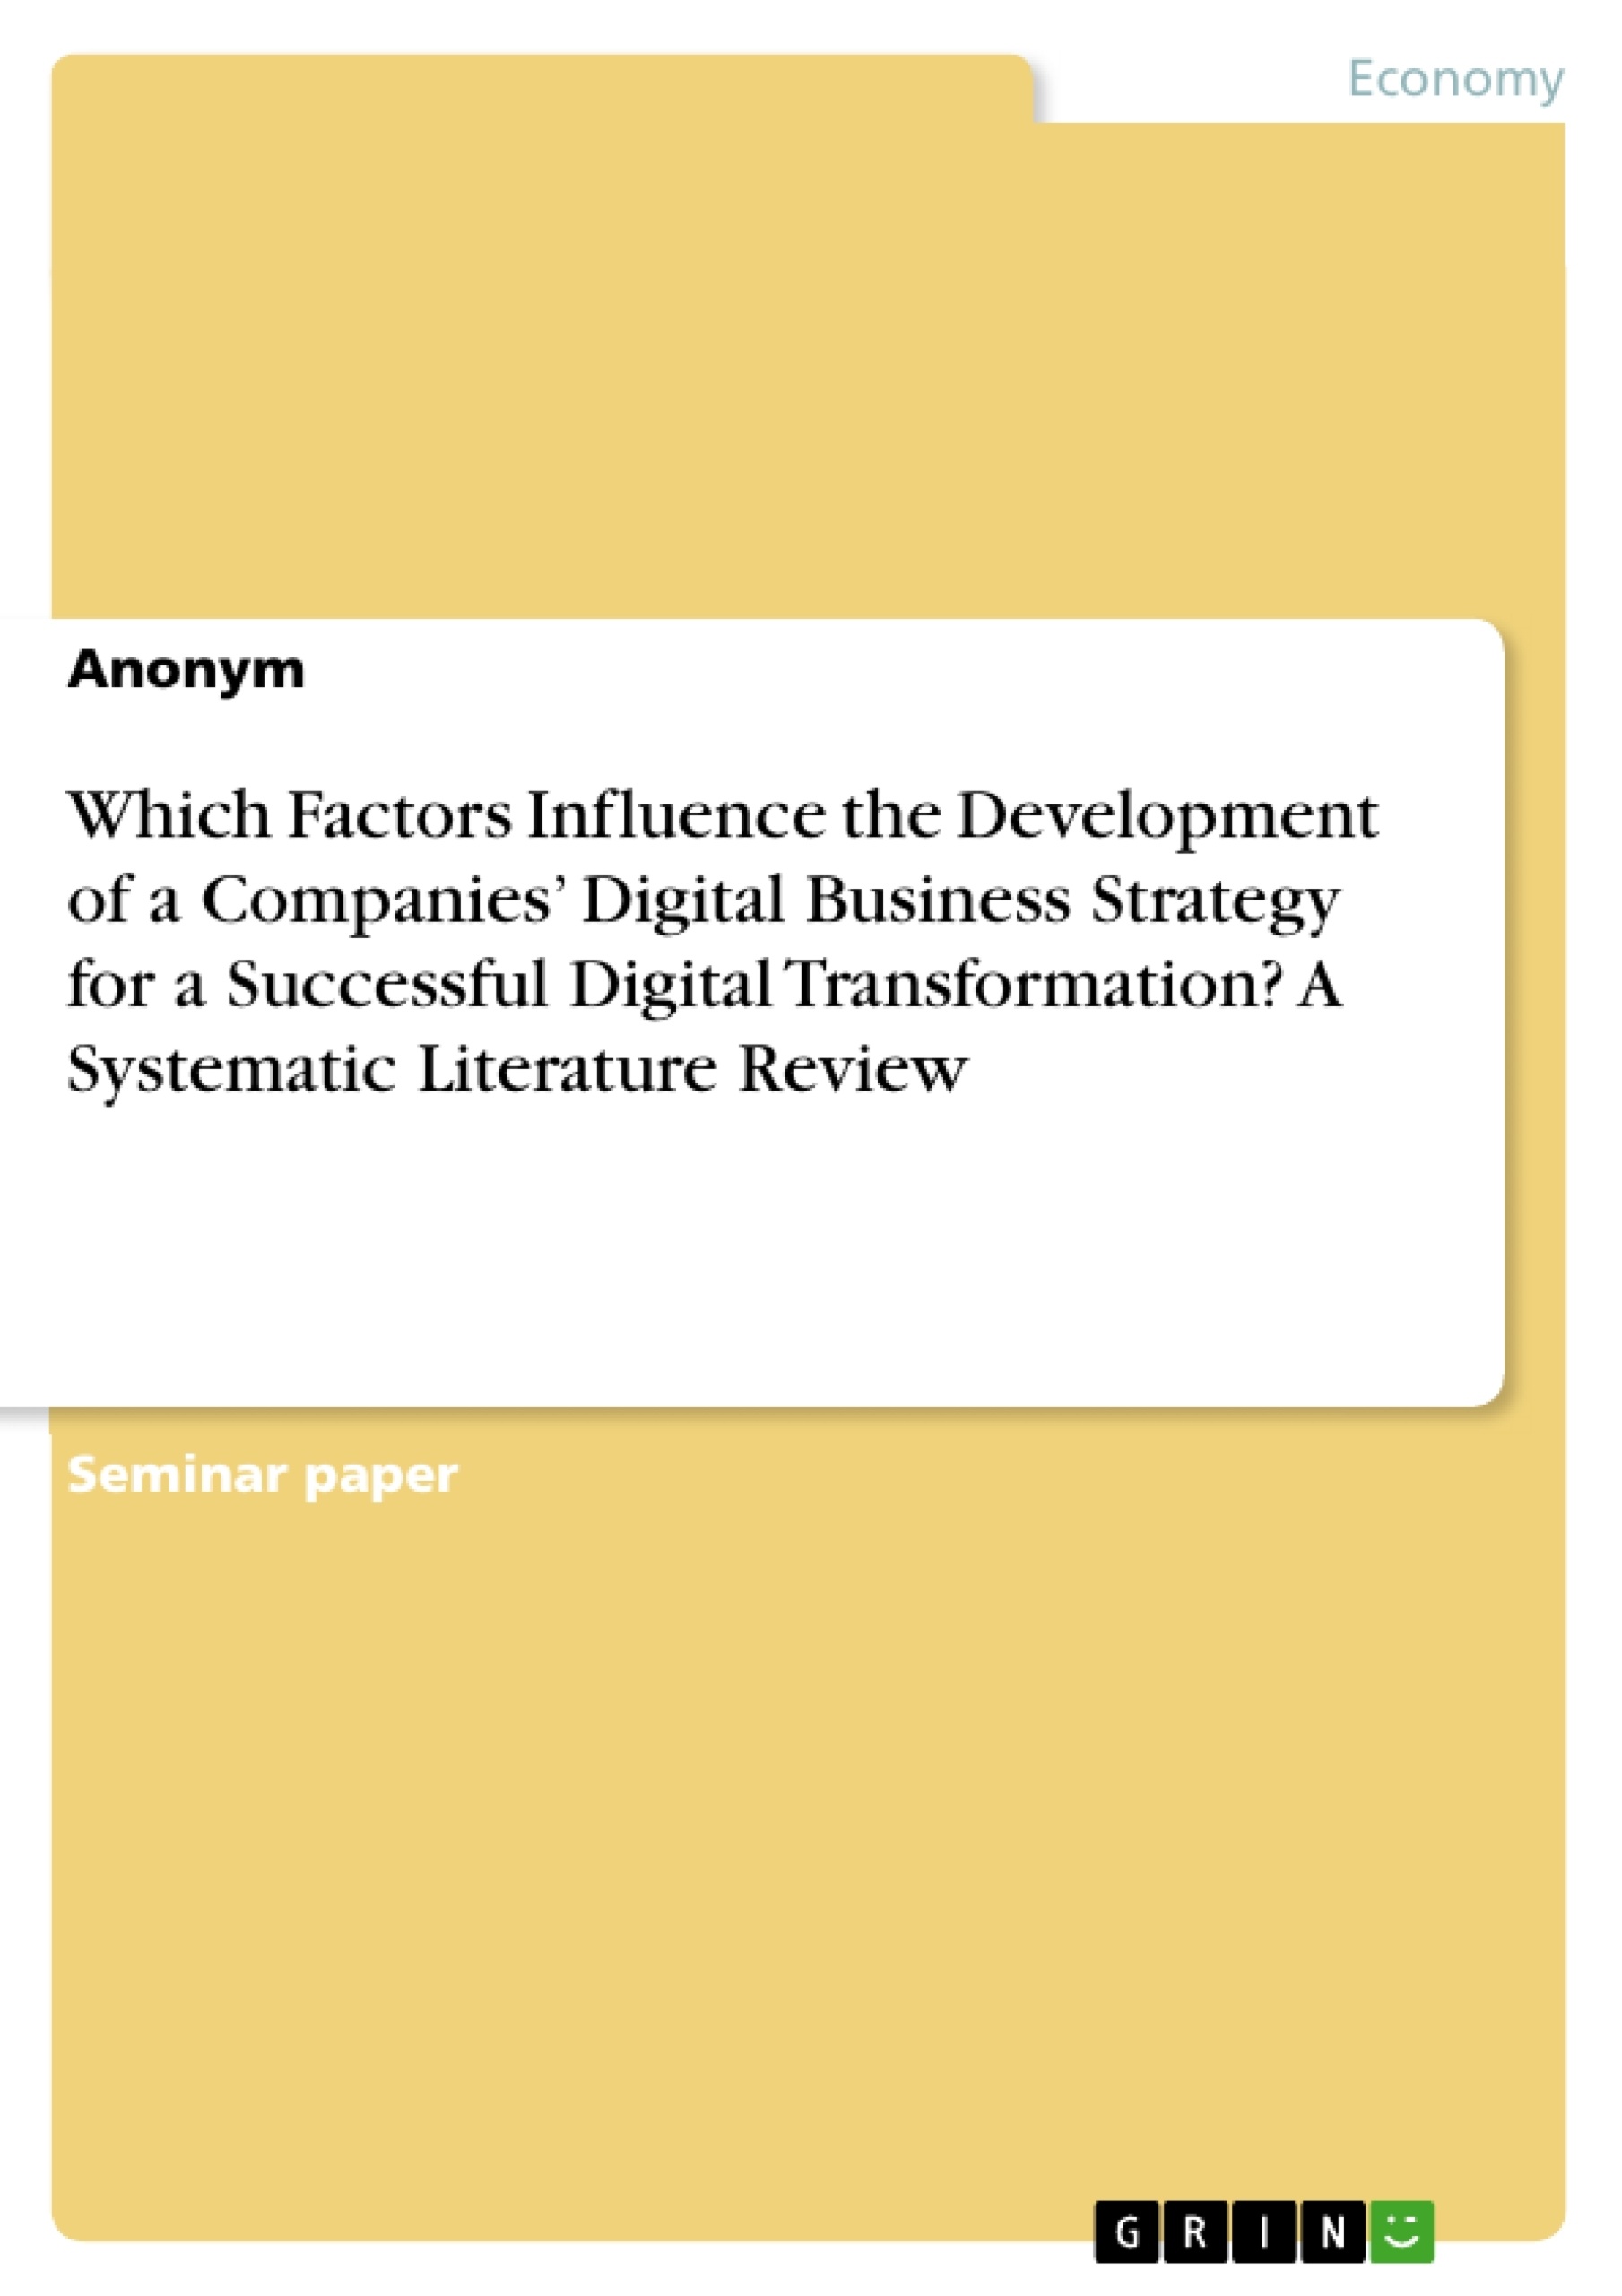 Title: Which Factors Influence the Development of a Companies’ Digital Business Strategy for a Successful Digital Transformation? A Systematic Literature Review